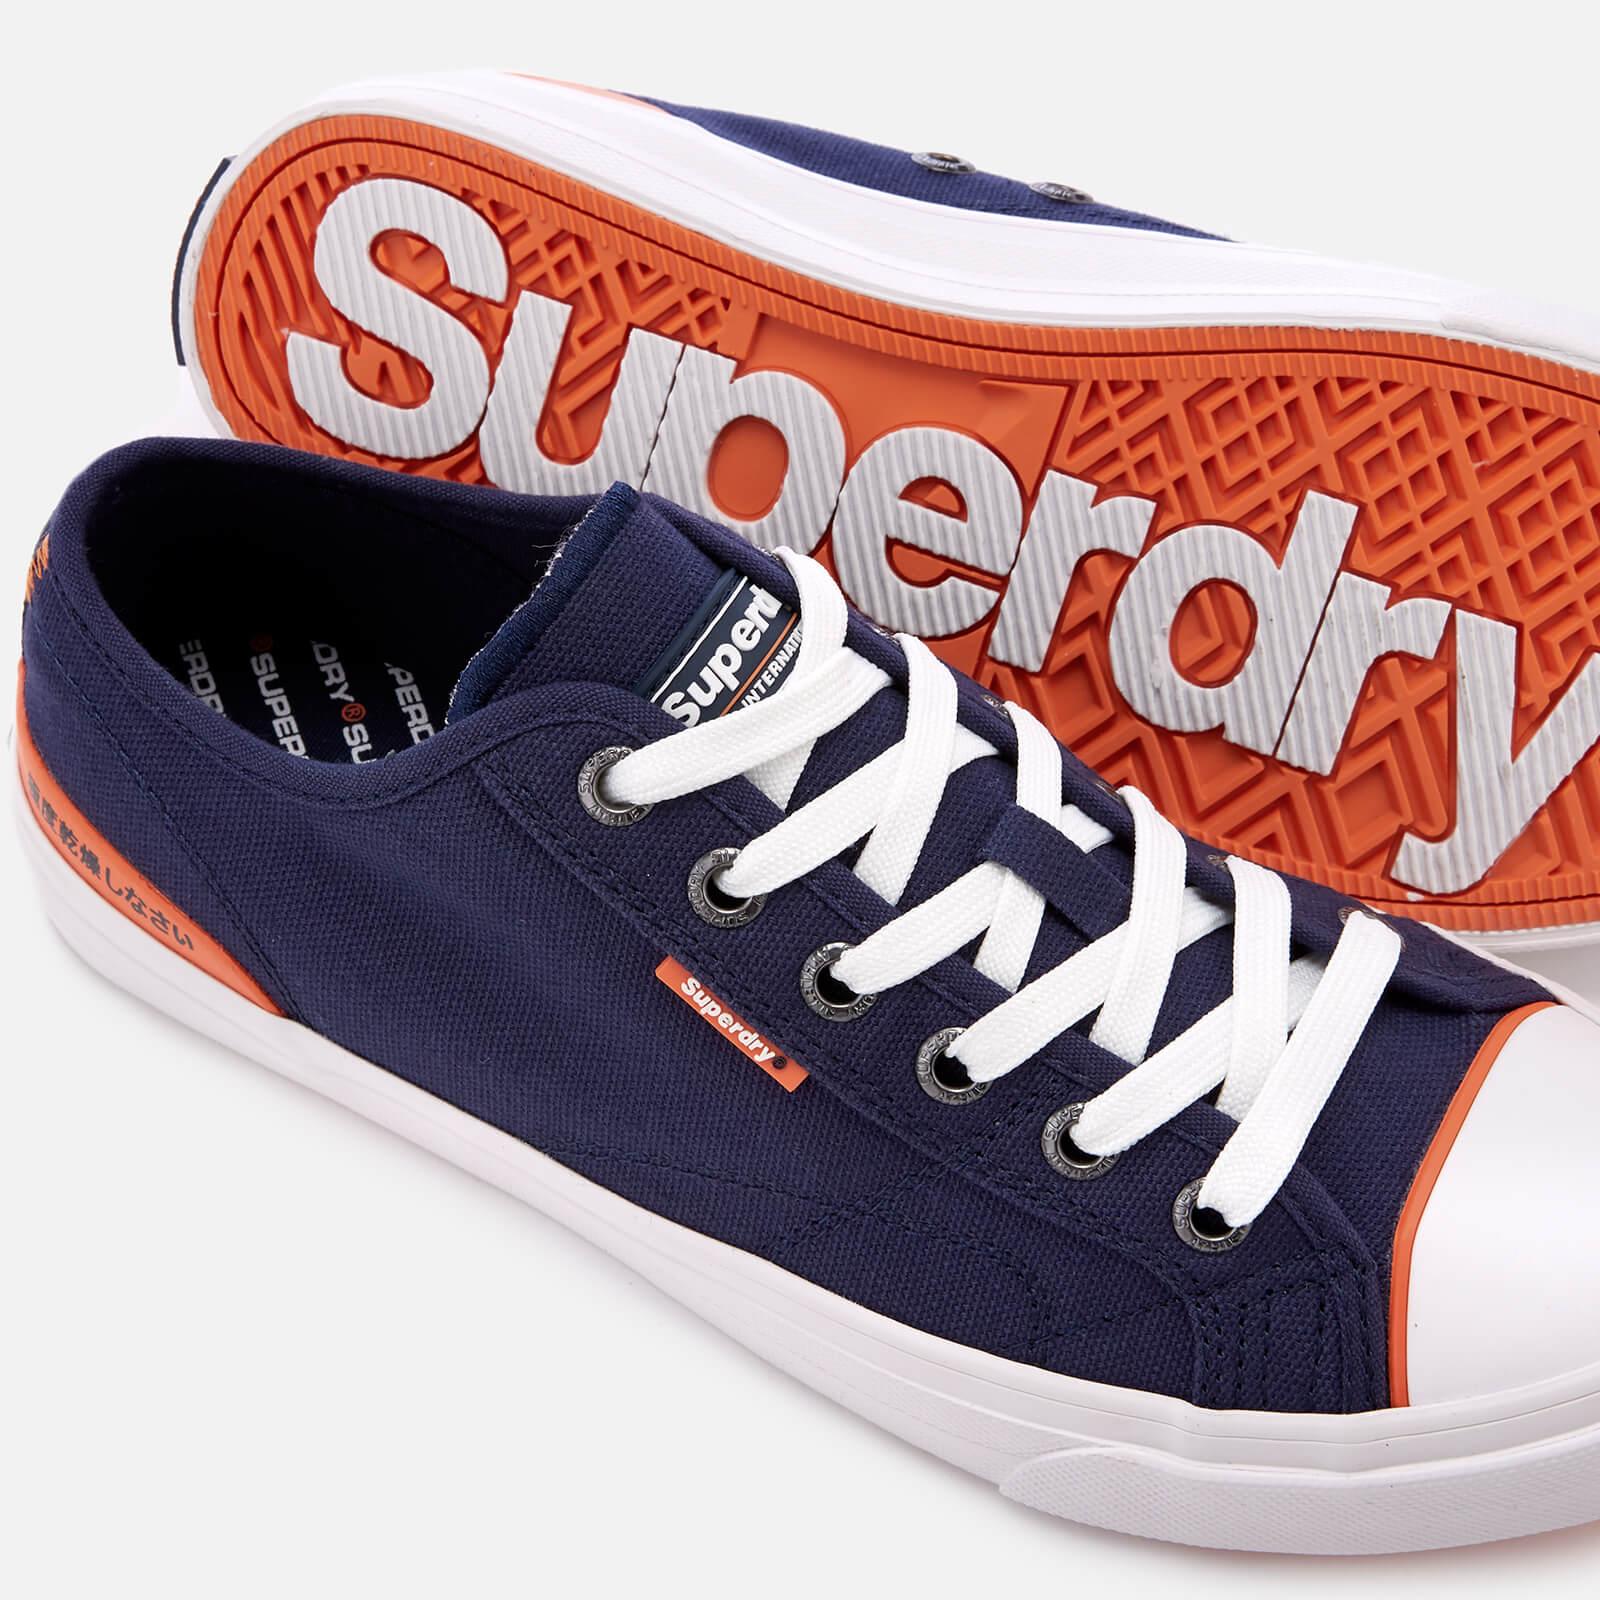 Superdry Rubber Trophy Classic Low Trainers in Navy (Blue) for Men - Lyst